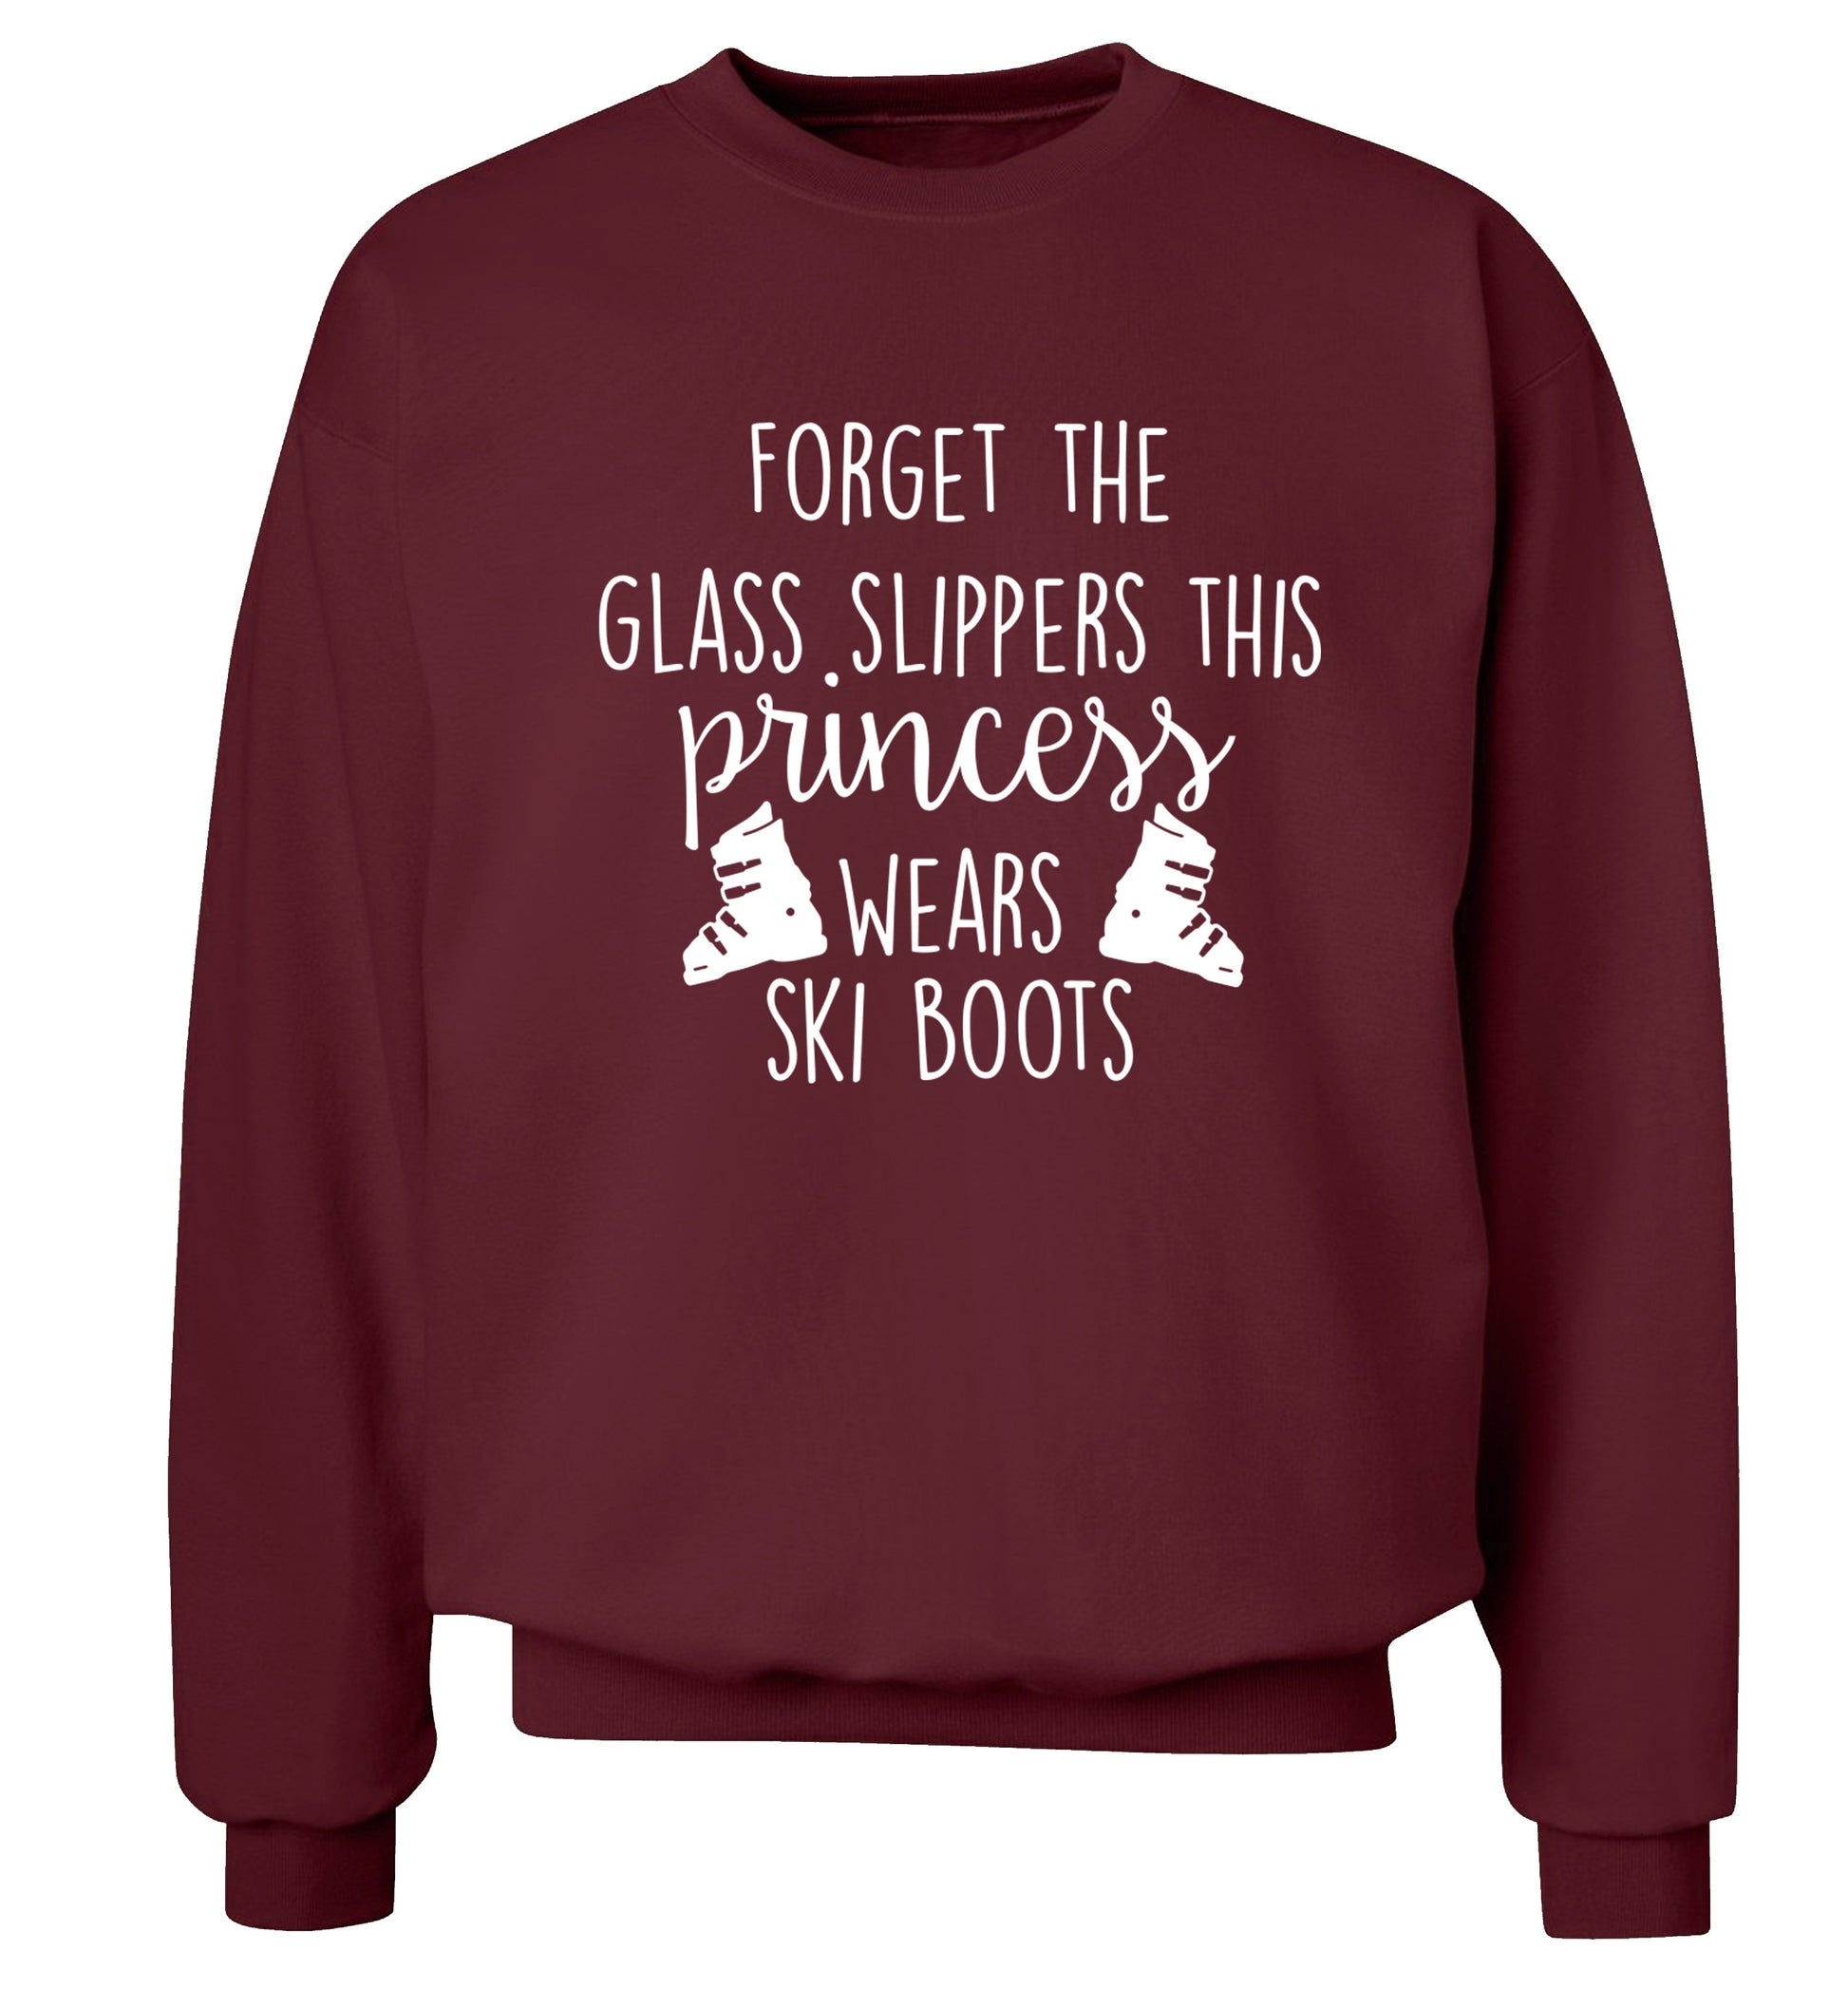 Forget the glass slippers this princess wears ski boots Adult's unisex maroon Sweater 2XL